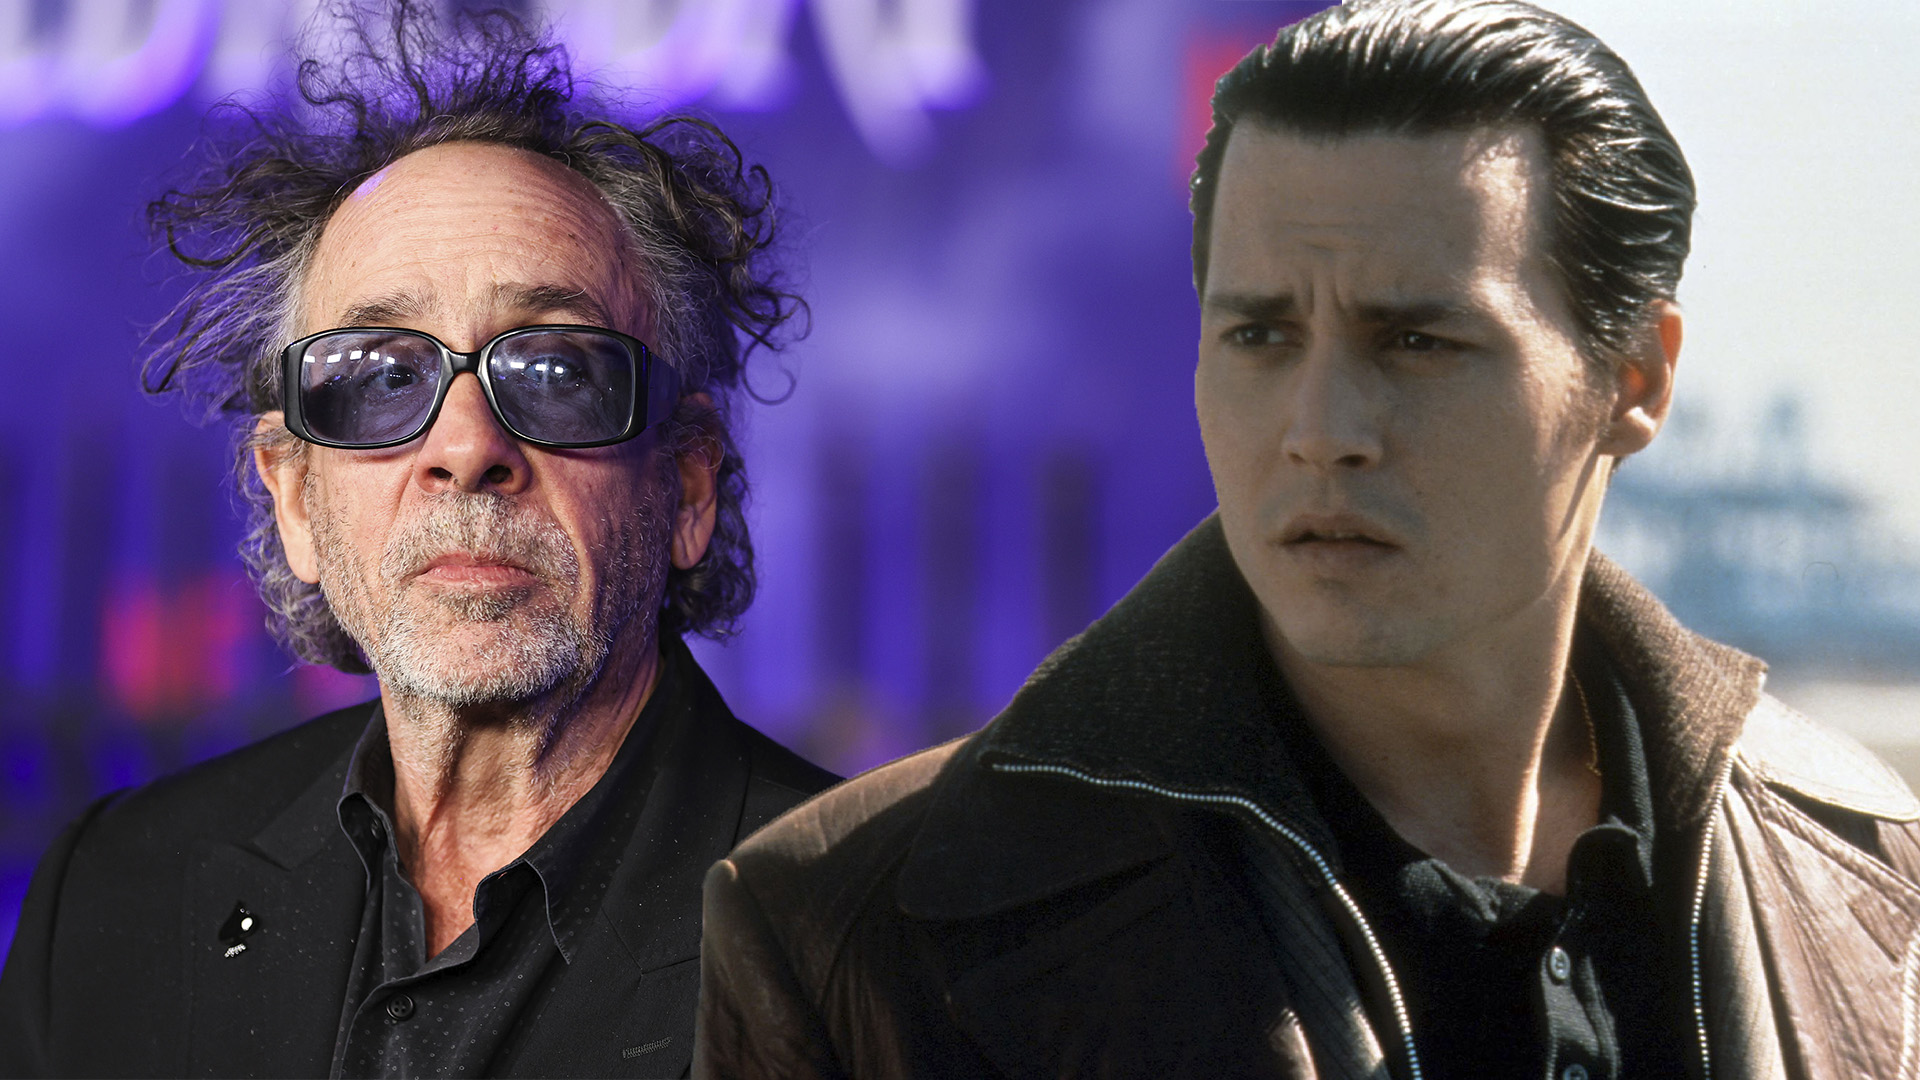 Johnny Was So Scared Of Tim Burton He Almost Blew Biggest Audition His Life